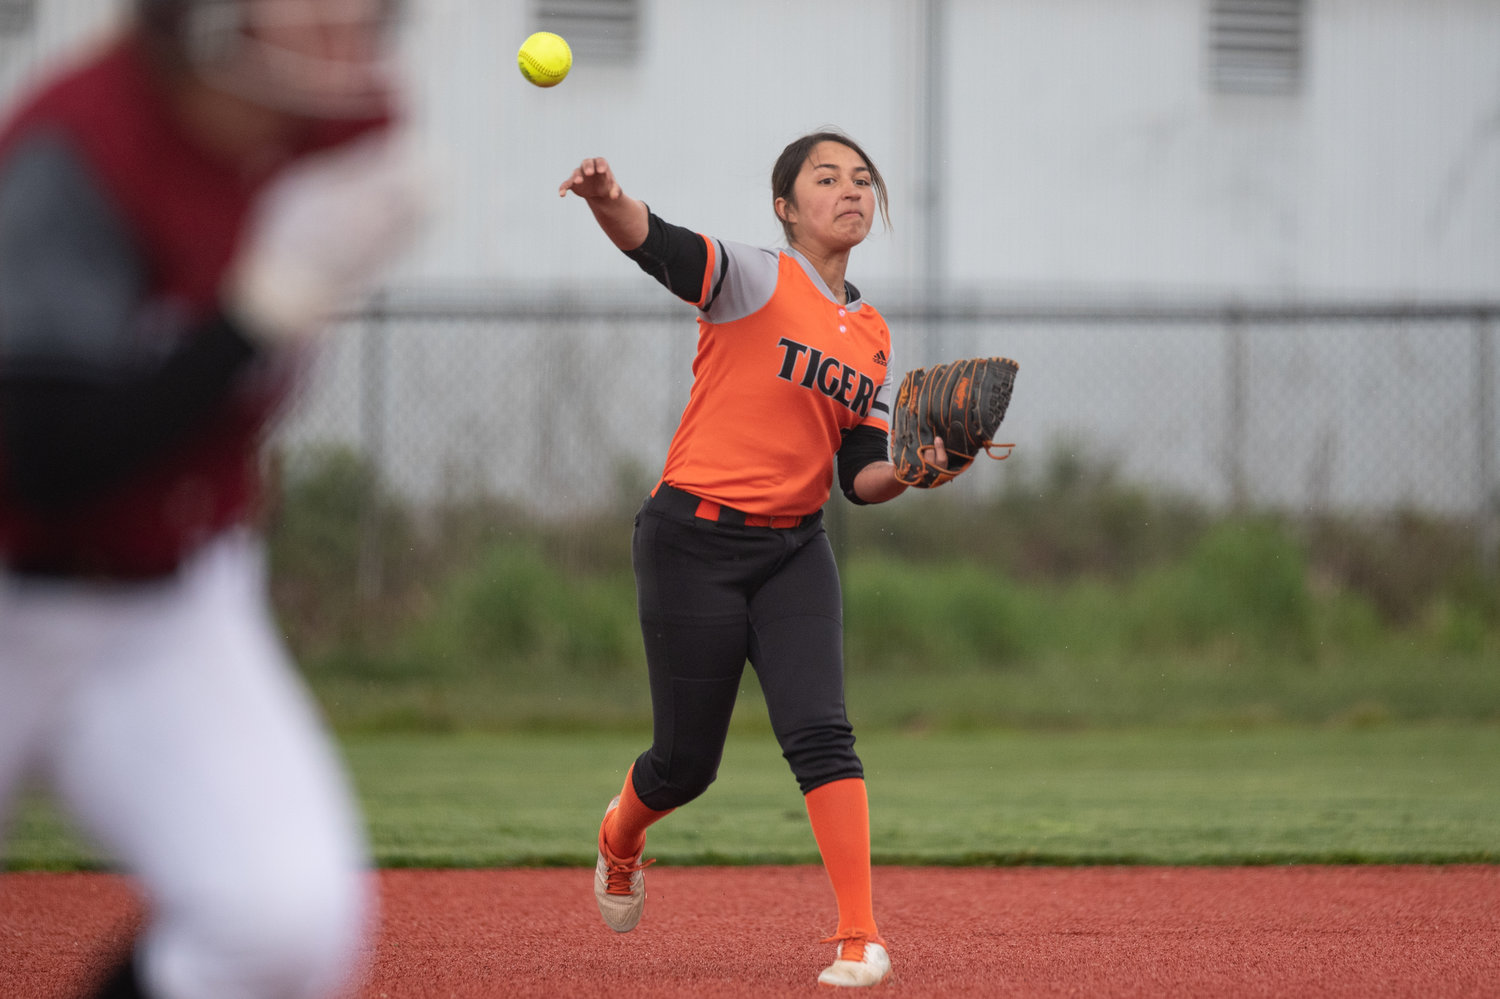 Centralia shortstop Makayla Chavez looks to throw an out at home plate against W.F. West April 26 at Recreation Park.